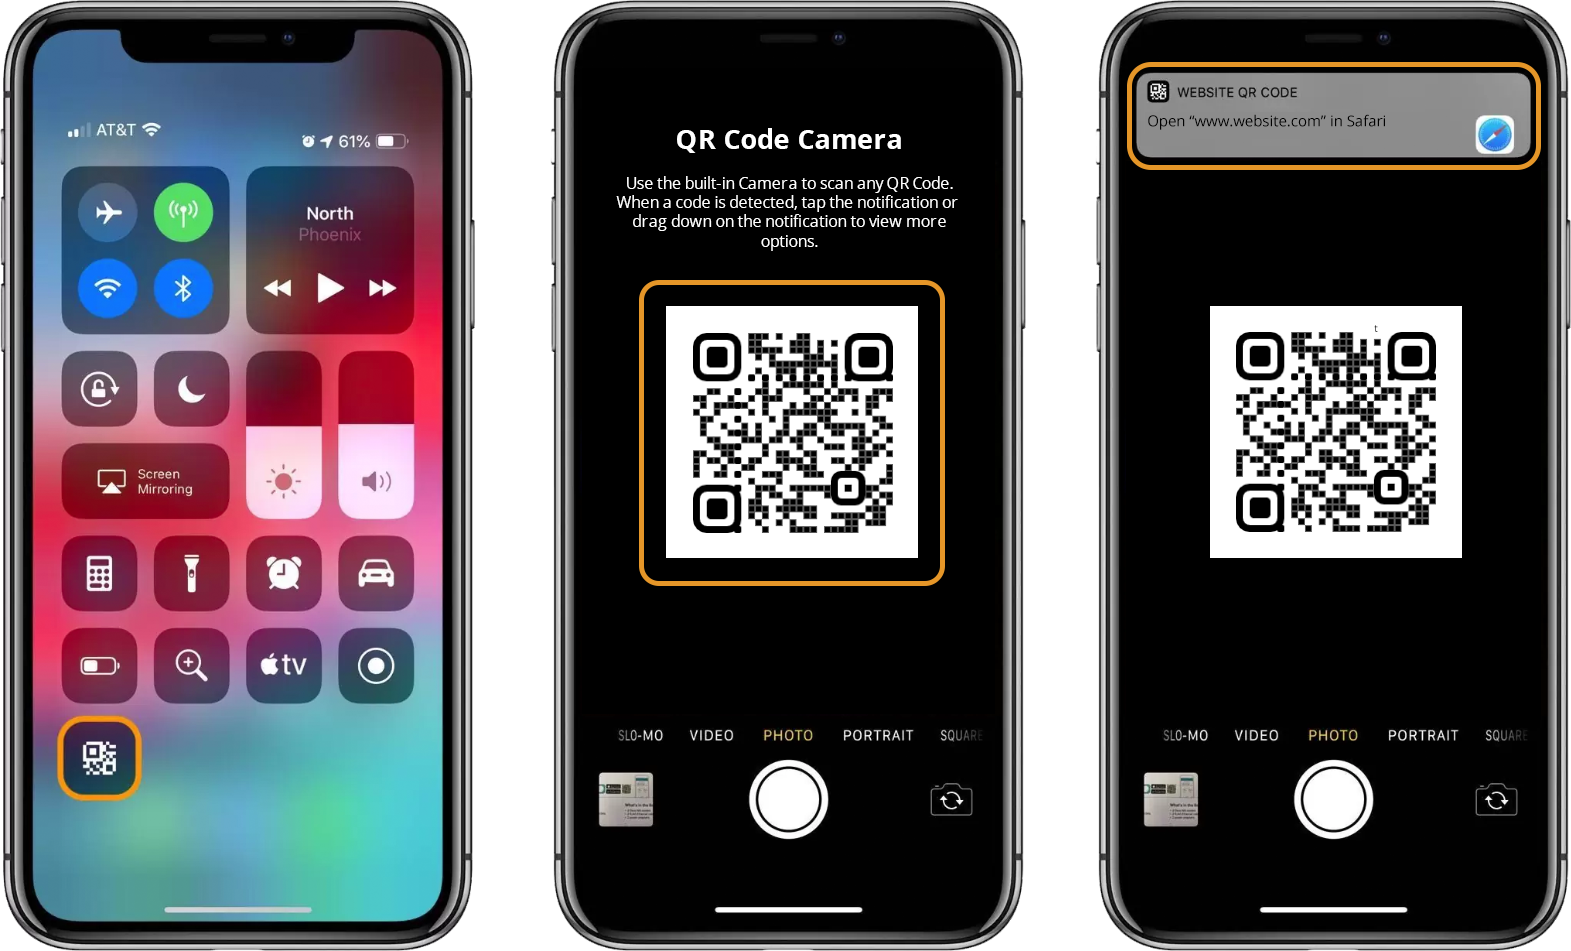 How to scan QR code on iPhone - Free QR Code Generator Online